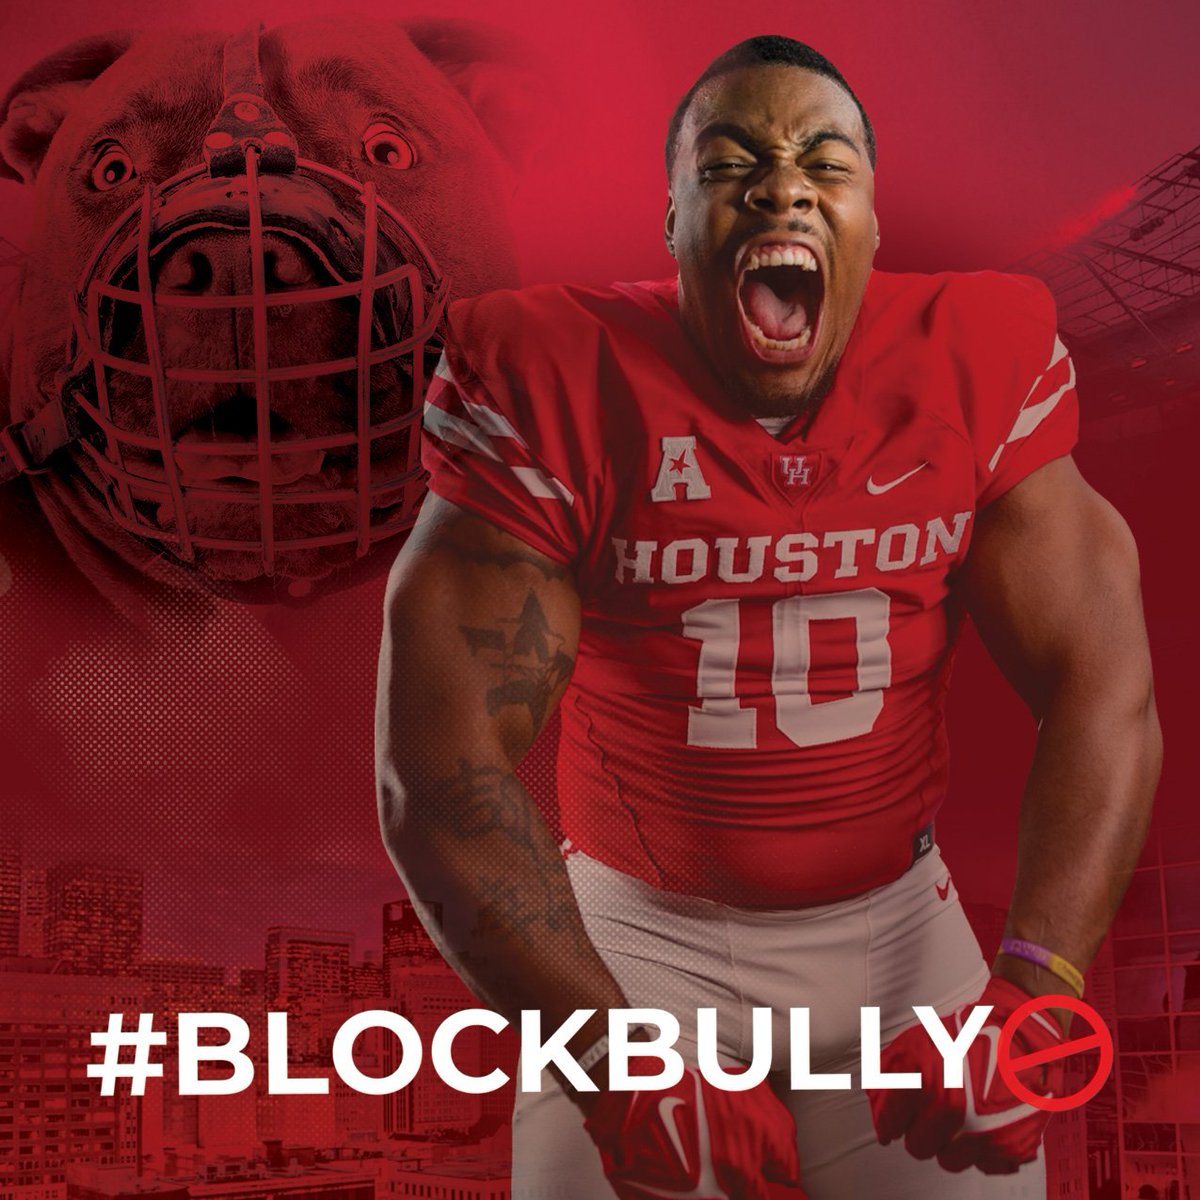 FOOTBALL IS BACK ... AND SO IS 'THE BLOCKBULLY🚫' @ChidozieNwankw ... TAKE OFF THE (A) AND PUT ON THE (XII) ... AND UNLEASH HELLLLLL ... GOOOOOO COOGS @UHCougarFB @SackaveUH @coachbrianearly @Doug_Belk @fbheraldsports @PFF_College @HoopnHollerHou @UHCougars @Holgorsendana